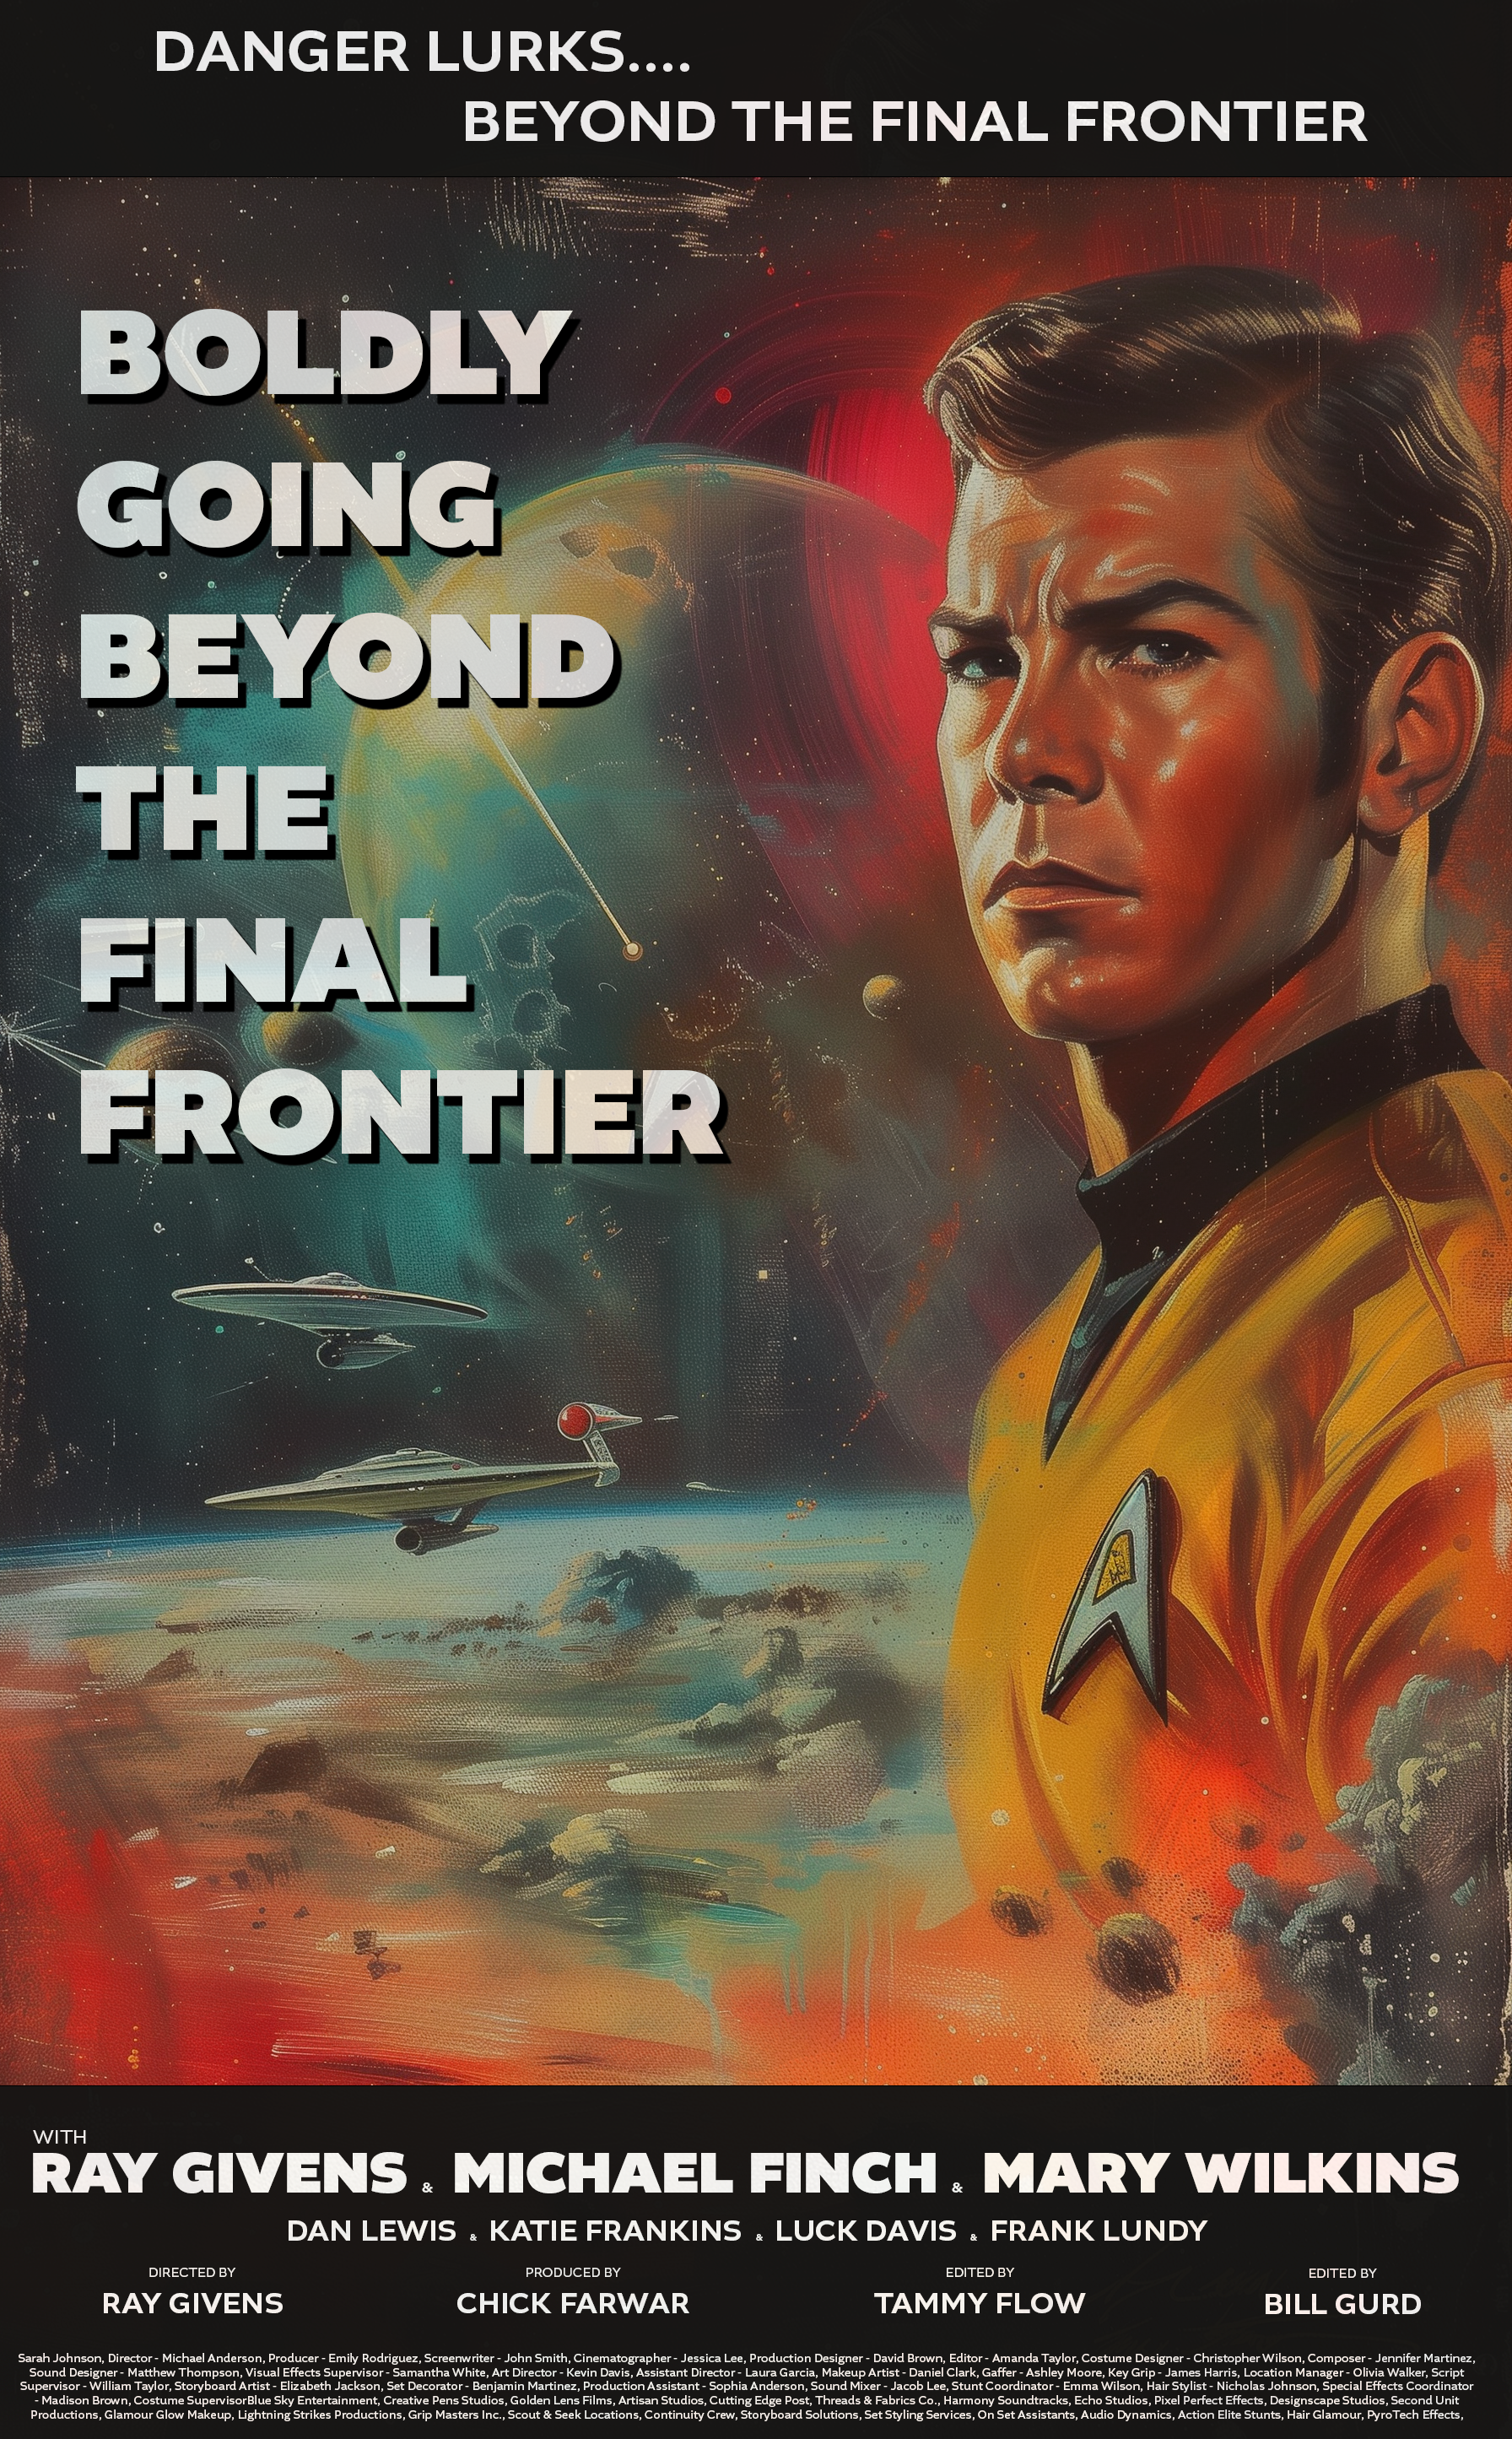 Name:  Beyond the Final Frontier.png
Views: 129
Size:  8.19 MB